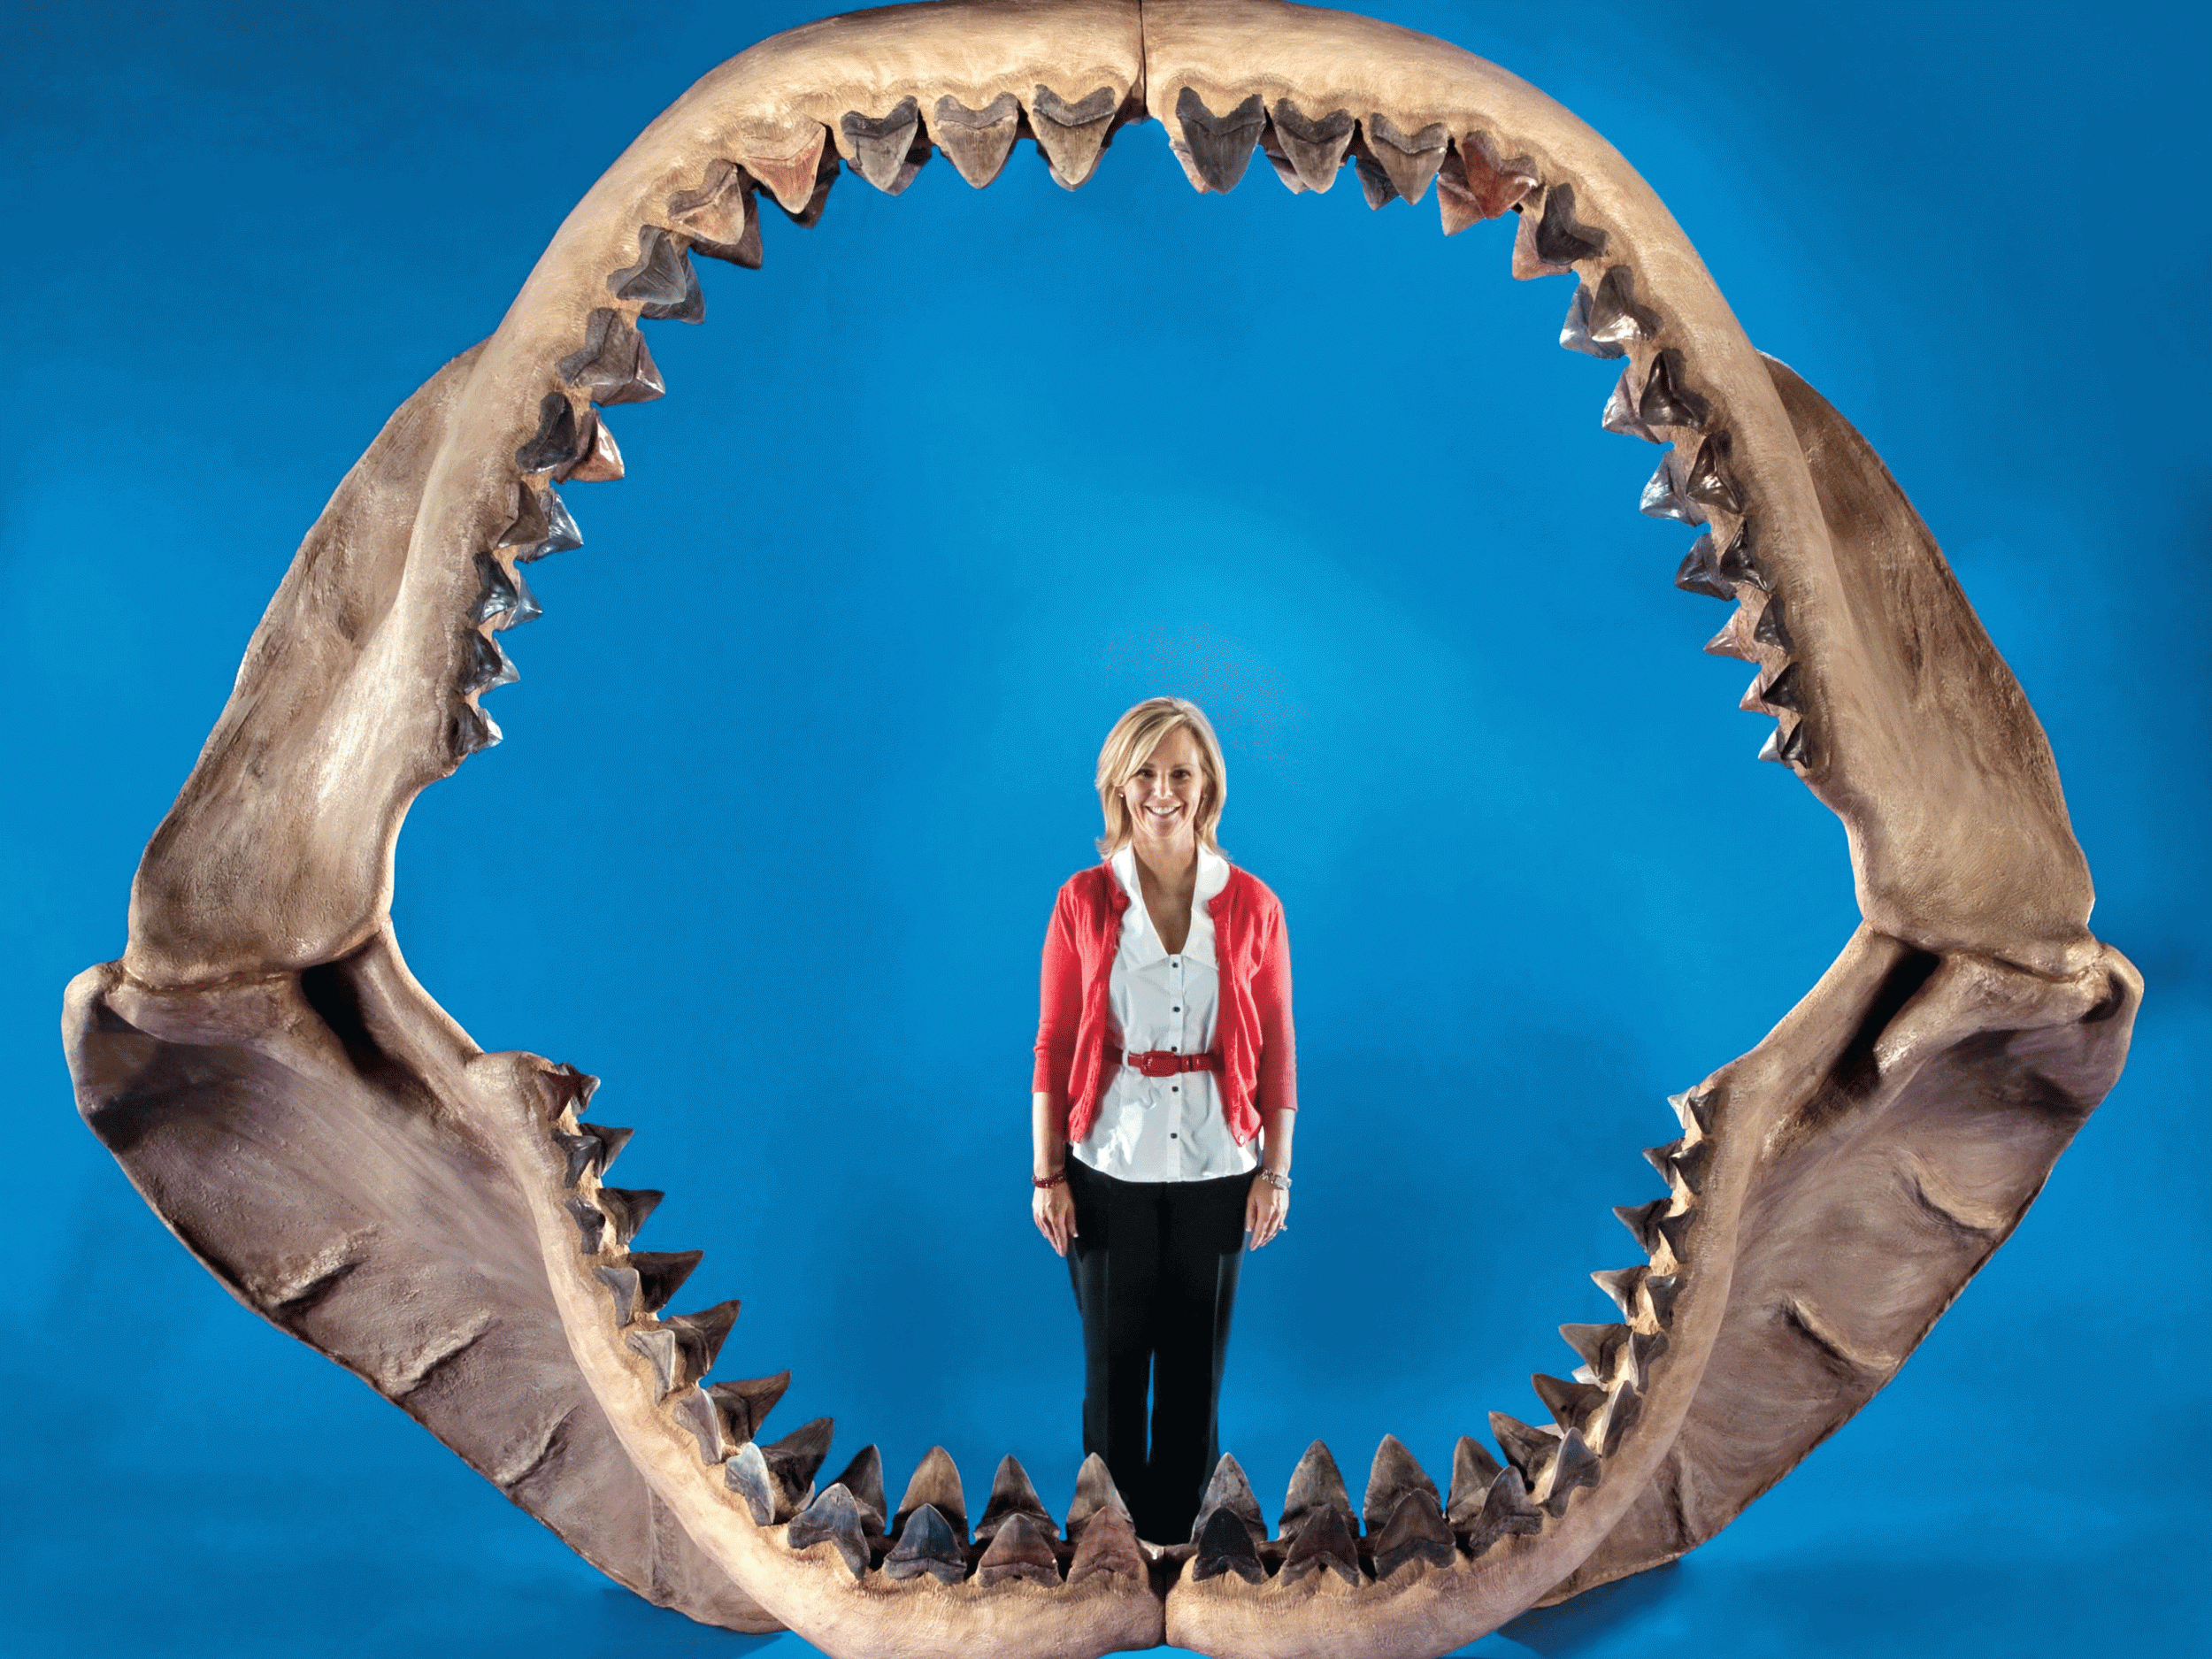 The jaws of a Megalodon shark, which is thought to have roamed the ocean 15 million years ago